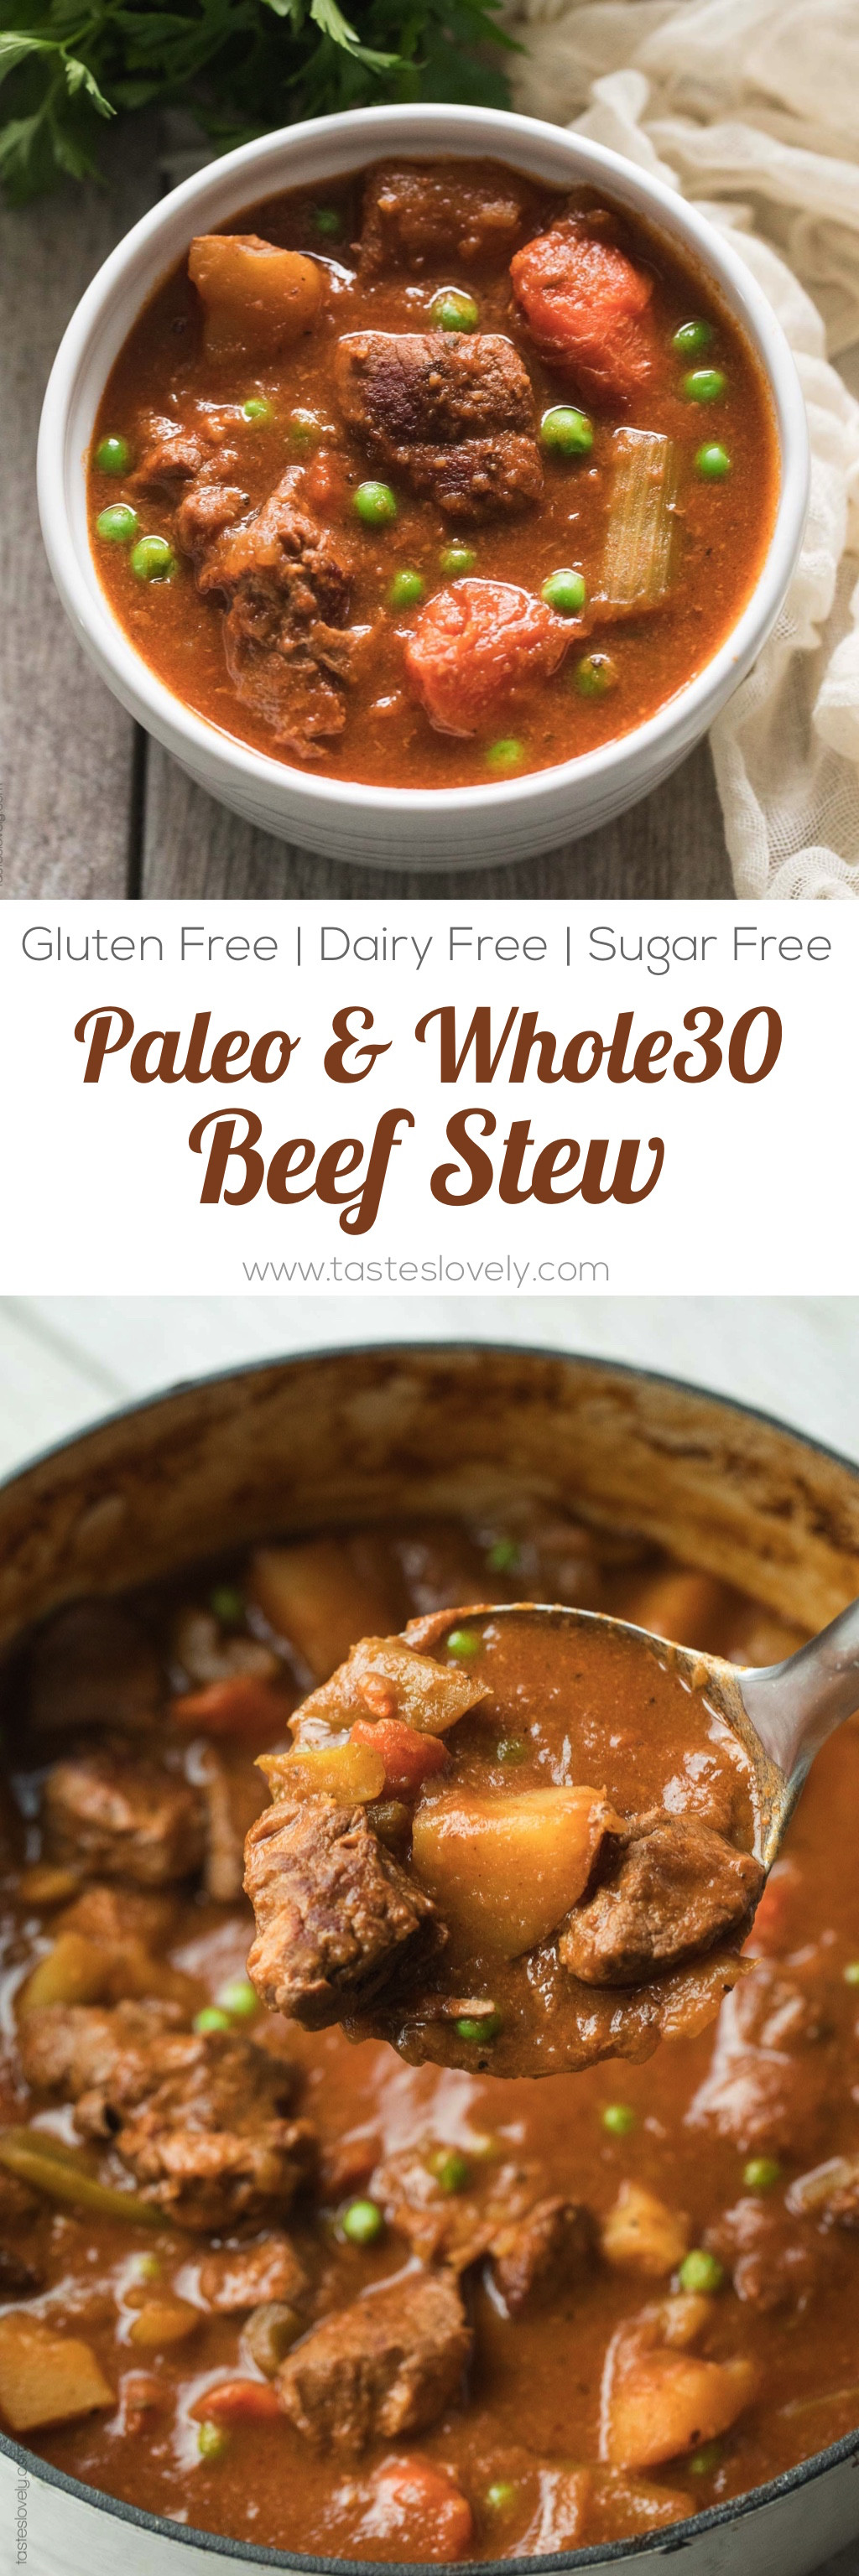 Gluten Free Dairy Free Slow Cooker Recipes
 Paleo & Whole30 Beef Stew Slow Cooker or Dutch Oven